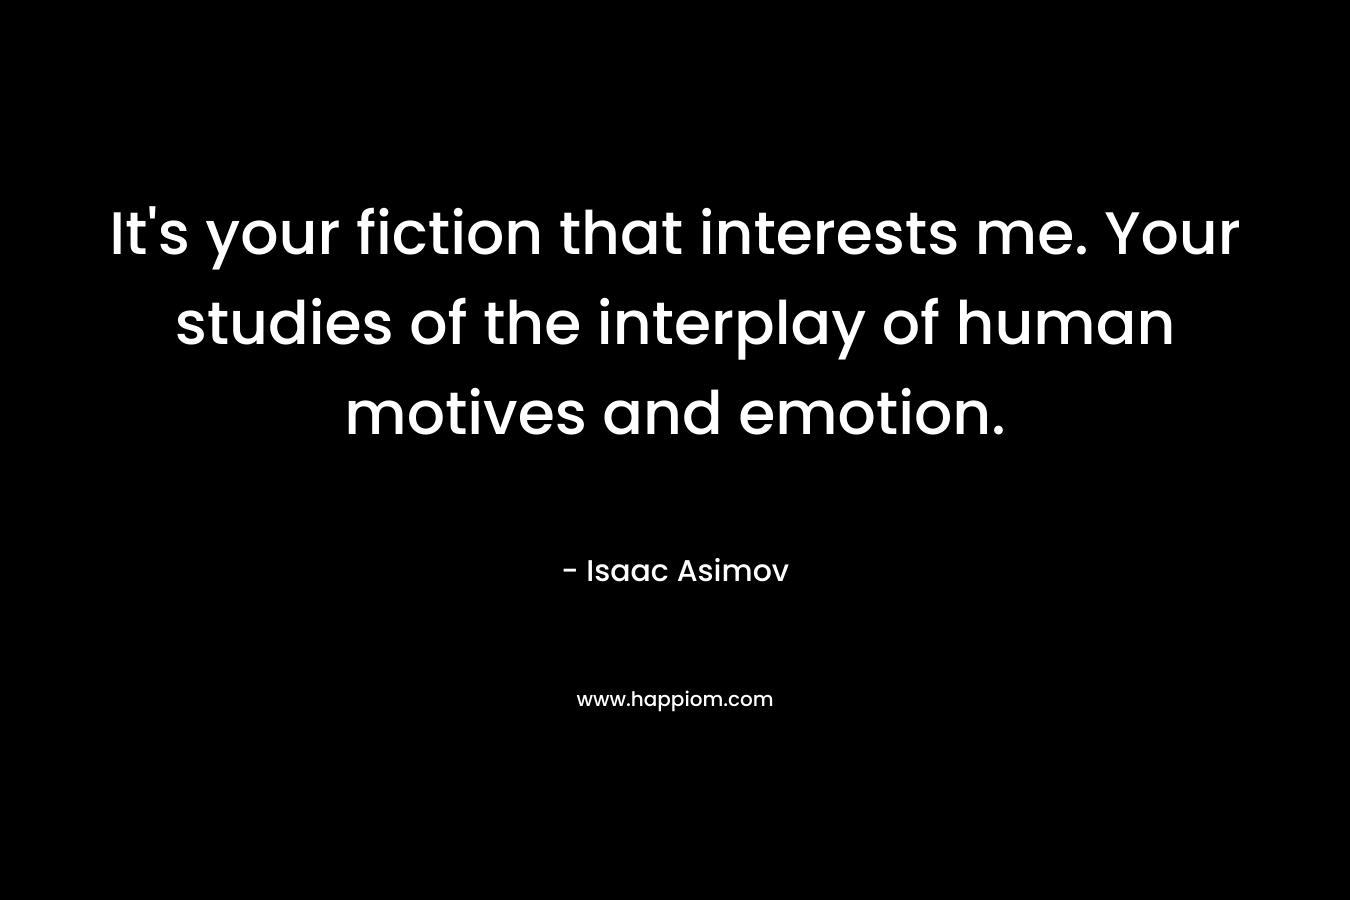 It's your fiction that interests me. Your studies of the interplay of human motives and emotion.